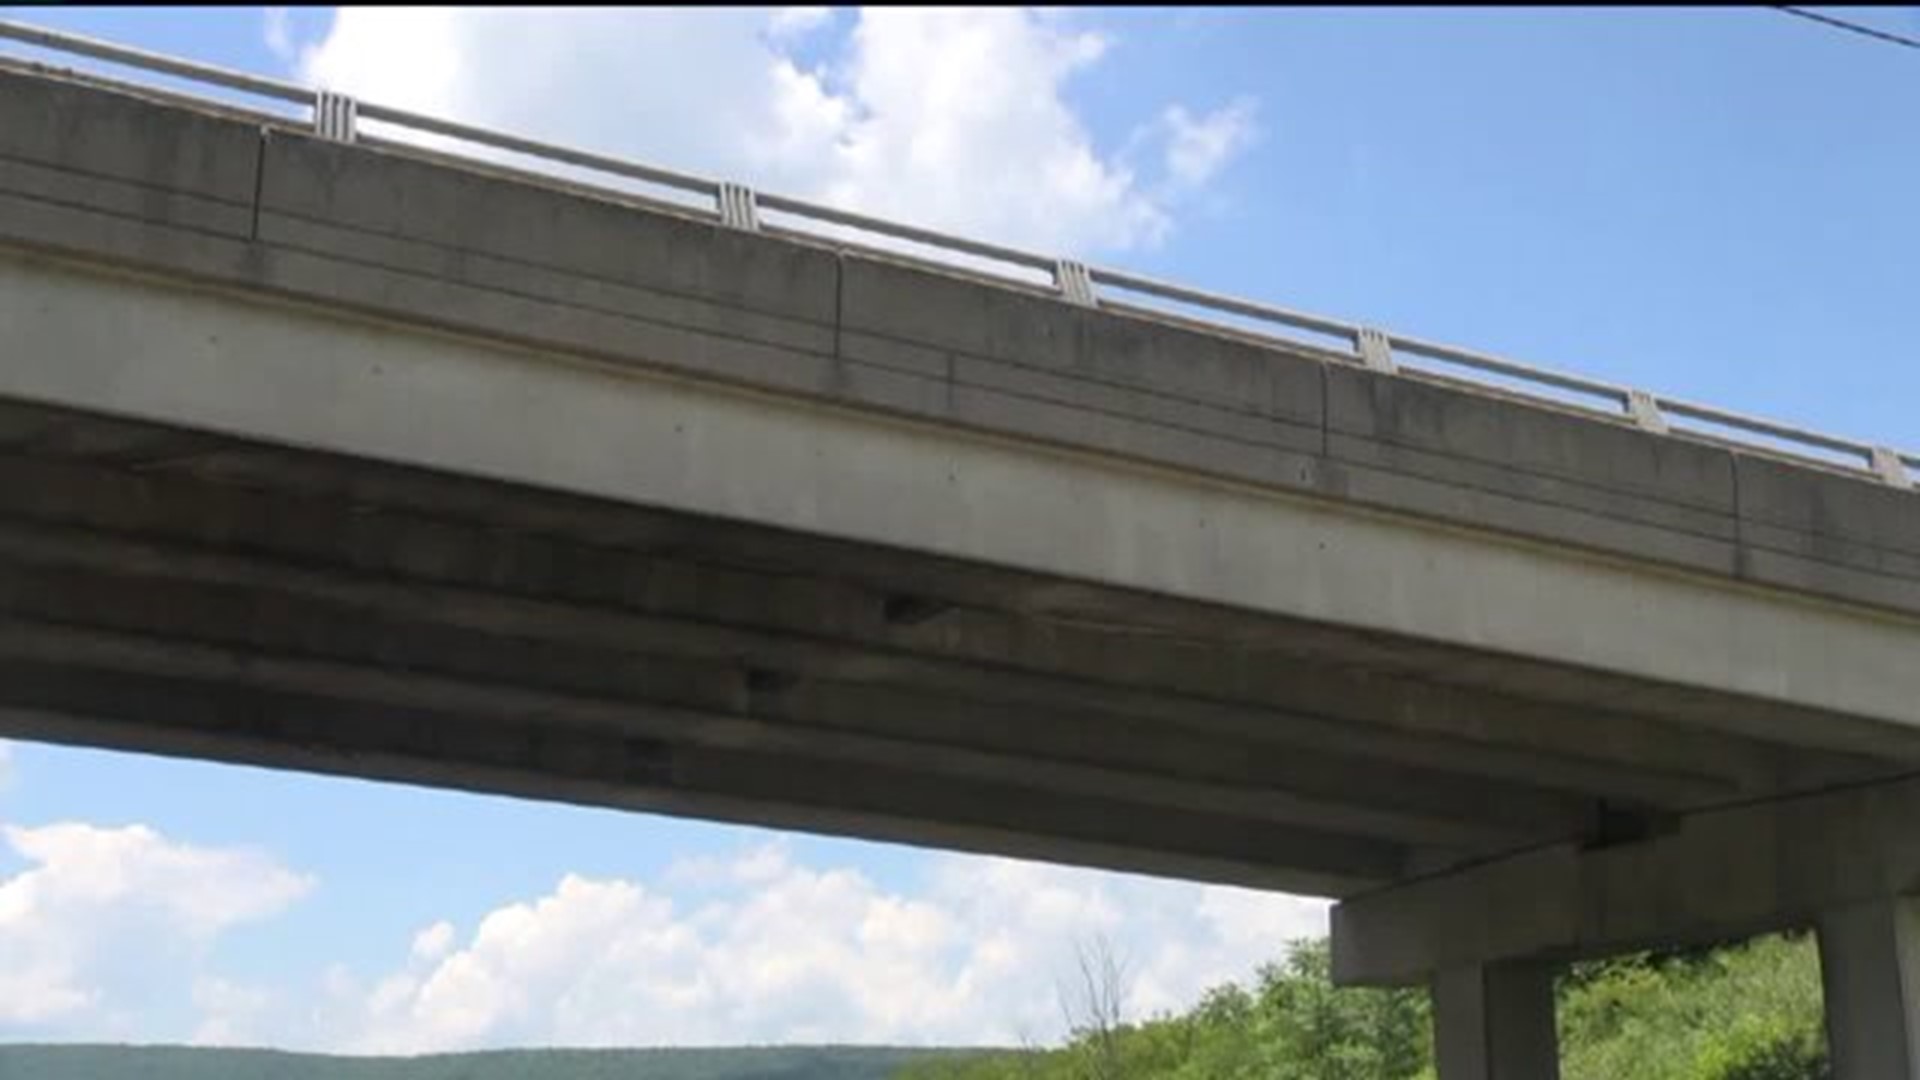 Rock Thrown from Interstate Overpass Injures Woman in Car